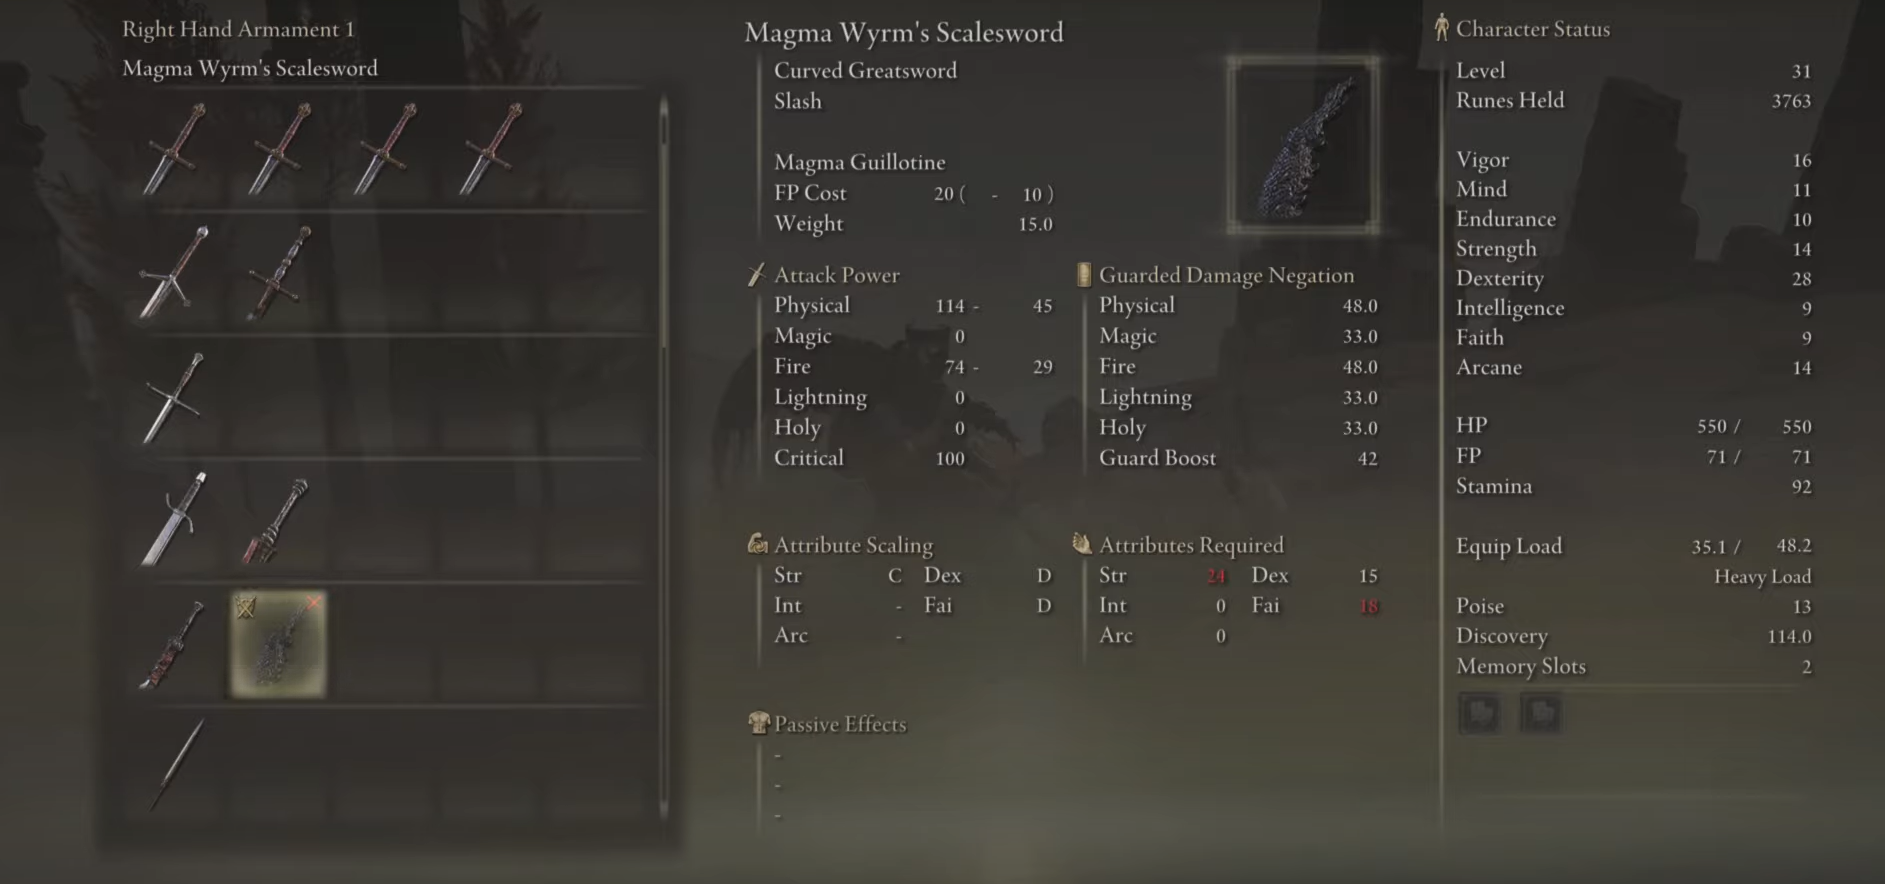 magma wyrms scalesword